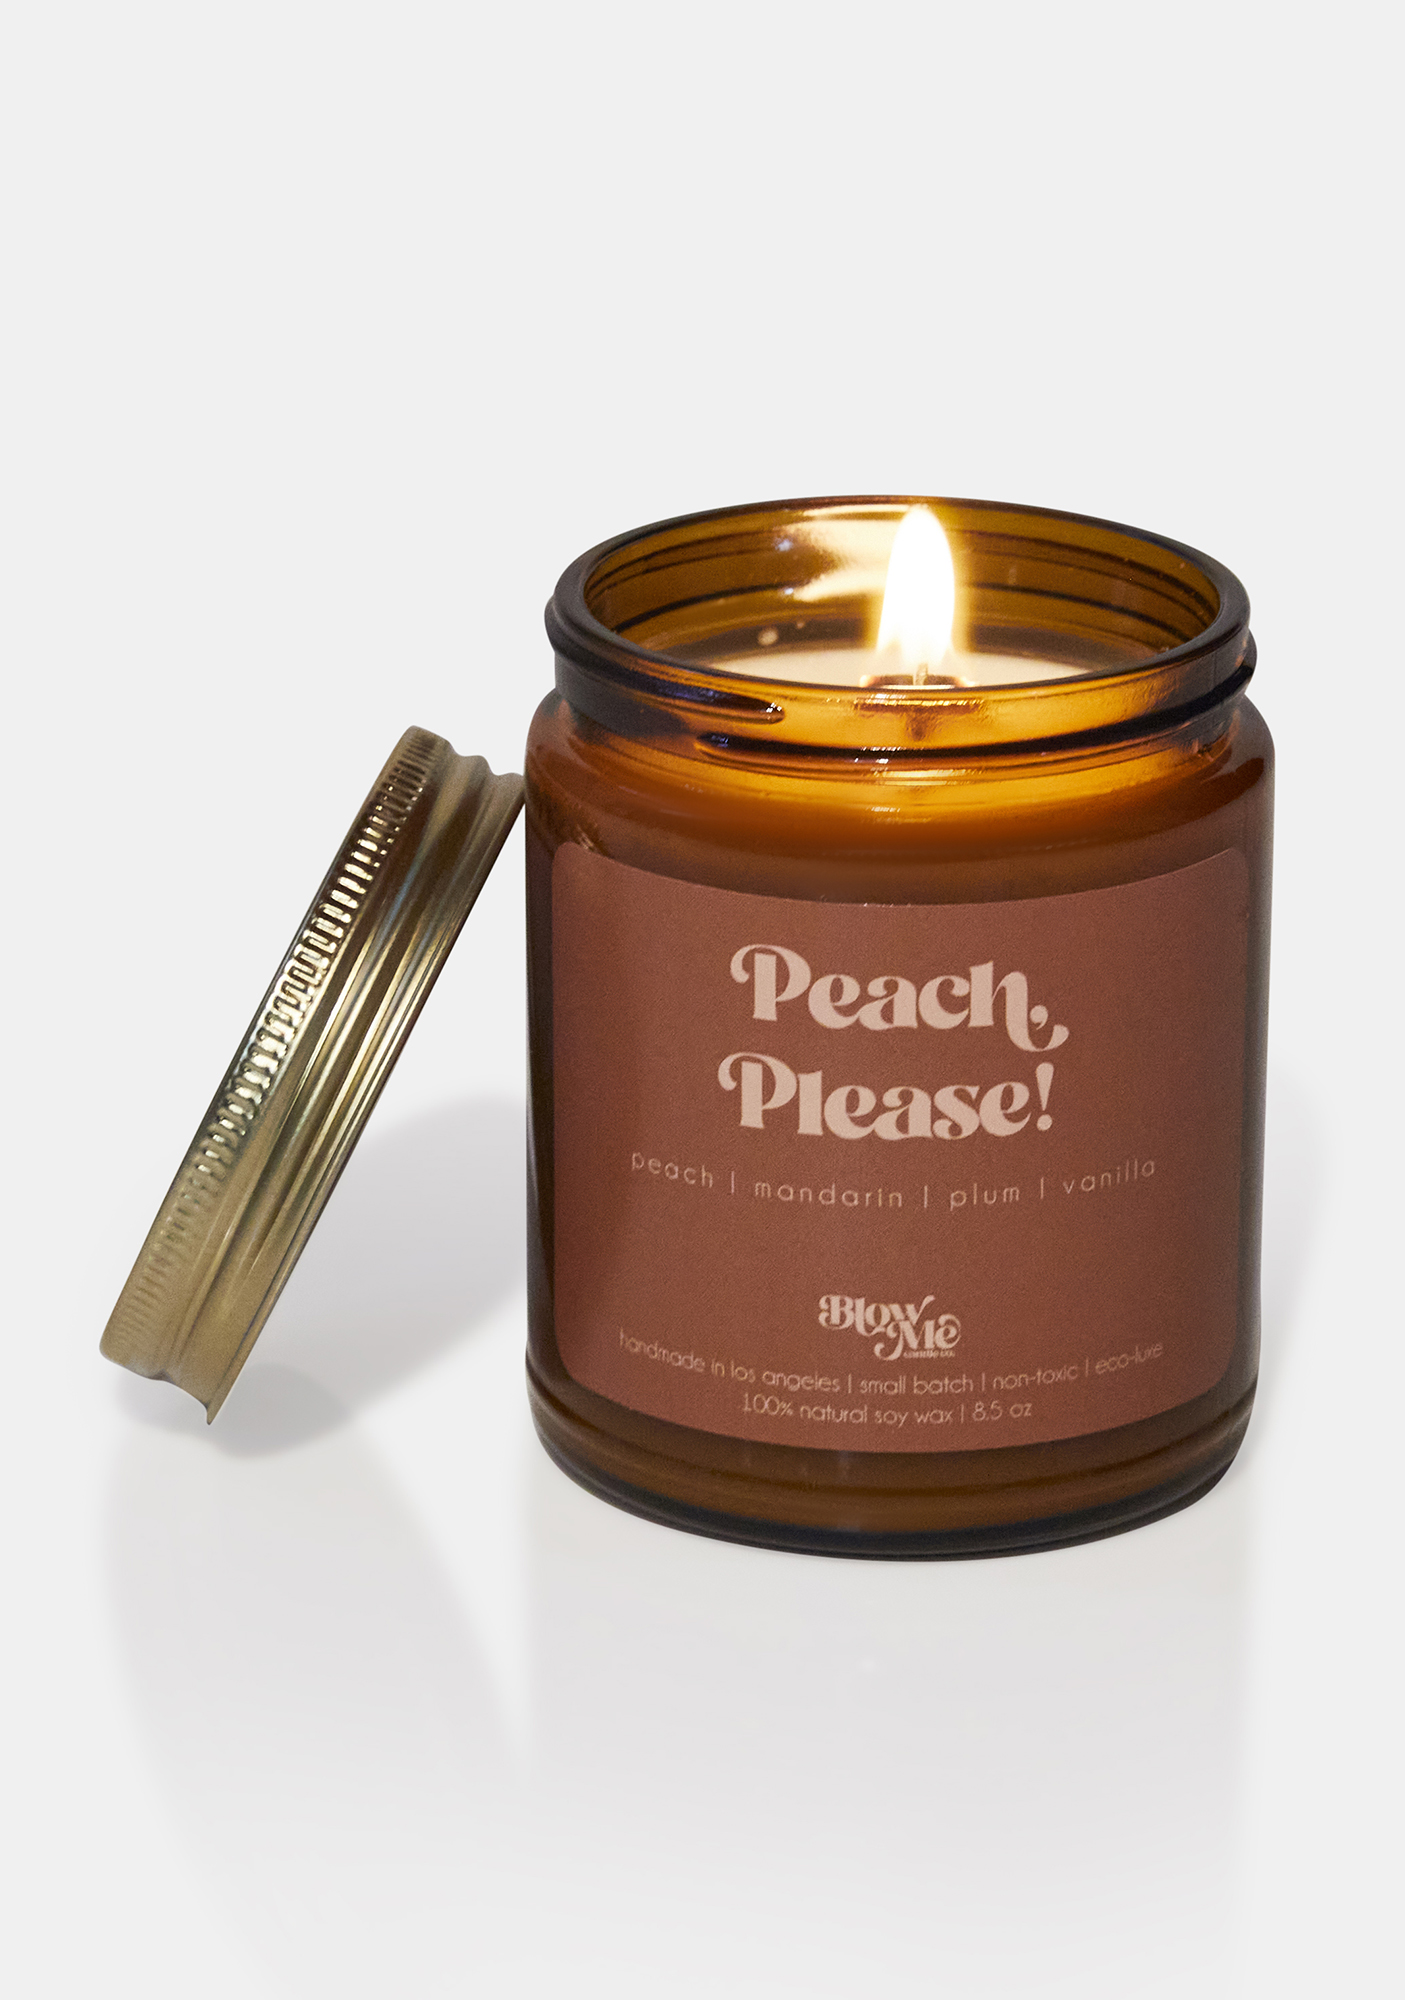 Blow Me Candle Co Peach, Please! Candle | Dolls Kill